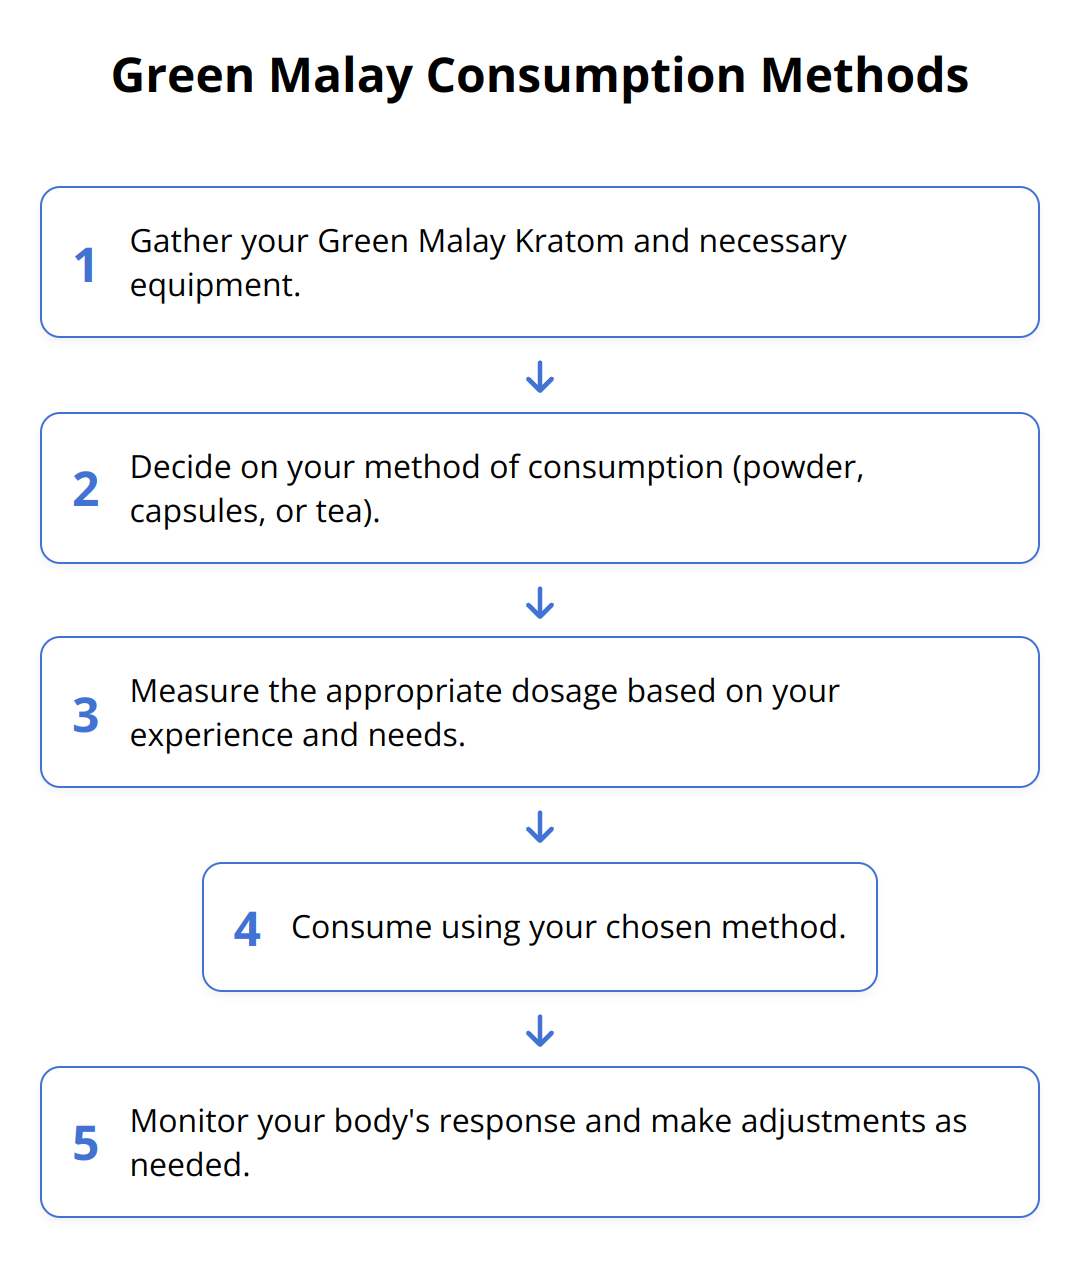 Flow Chart - Green Malay Consumption Methods